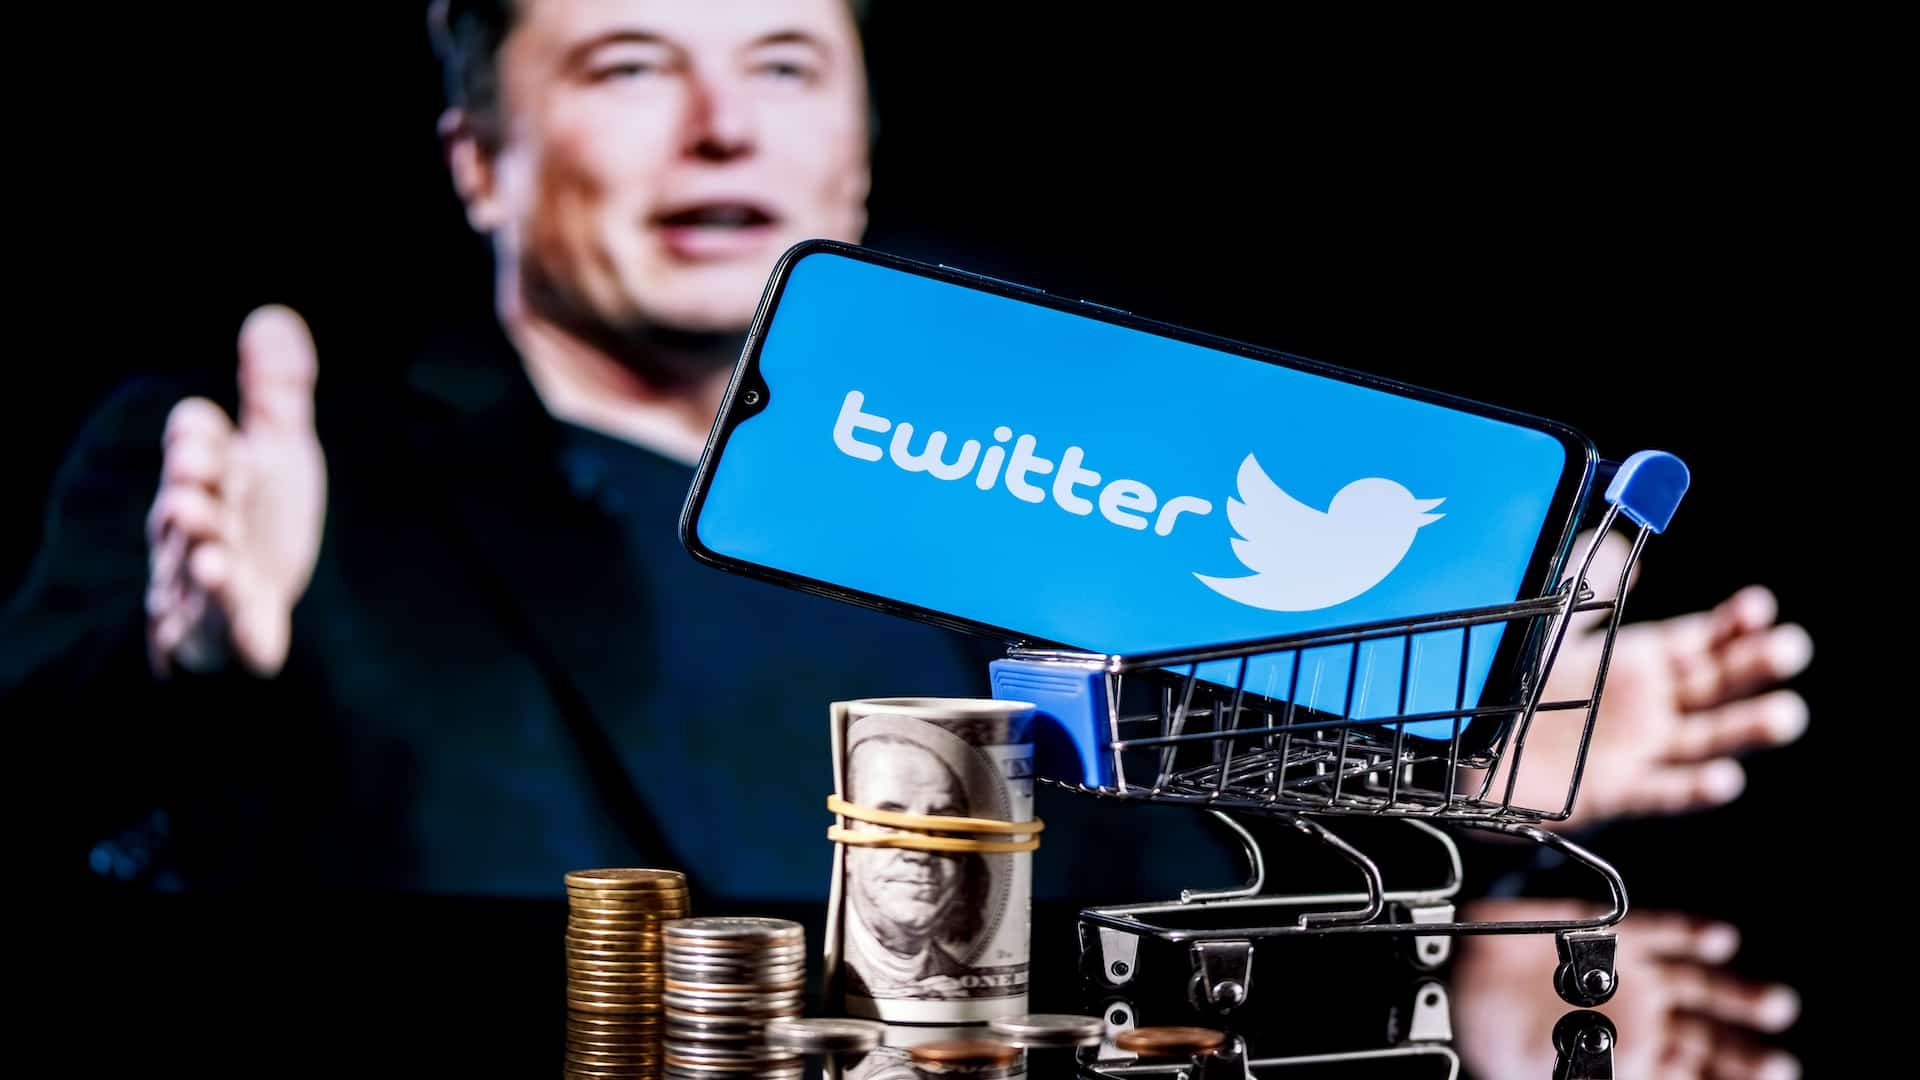 X (Twitter) slashes video ad prices to lure back advertisers